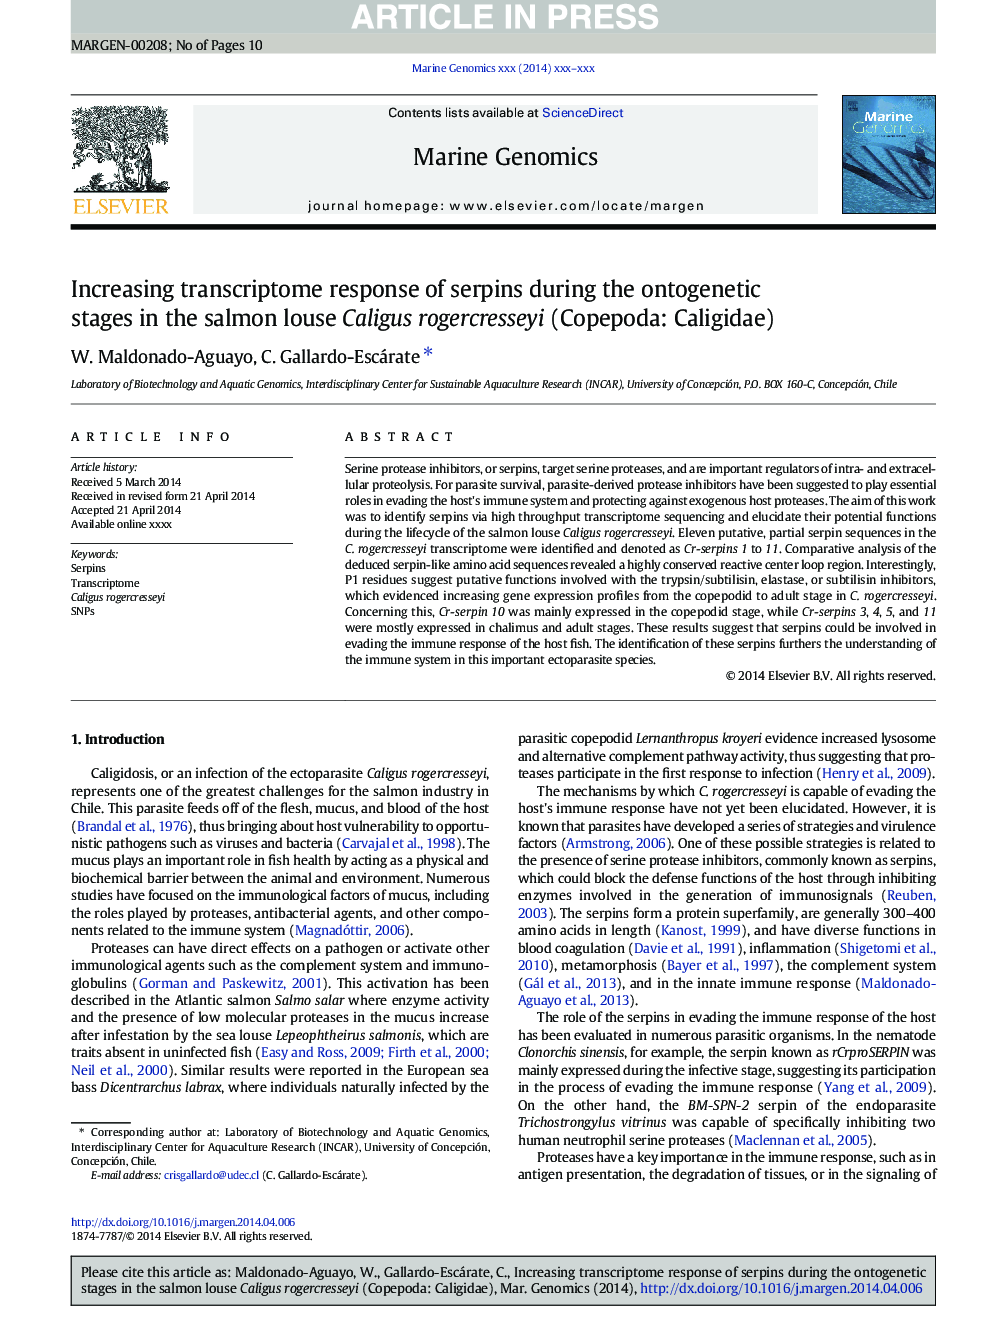 Increasing transcriptome response of serpins during the ontogenetic stages in the salmon louse Caligus rogercresseyi (Copepoda: Caligidae)